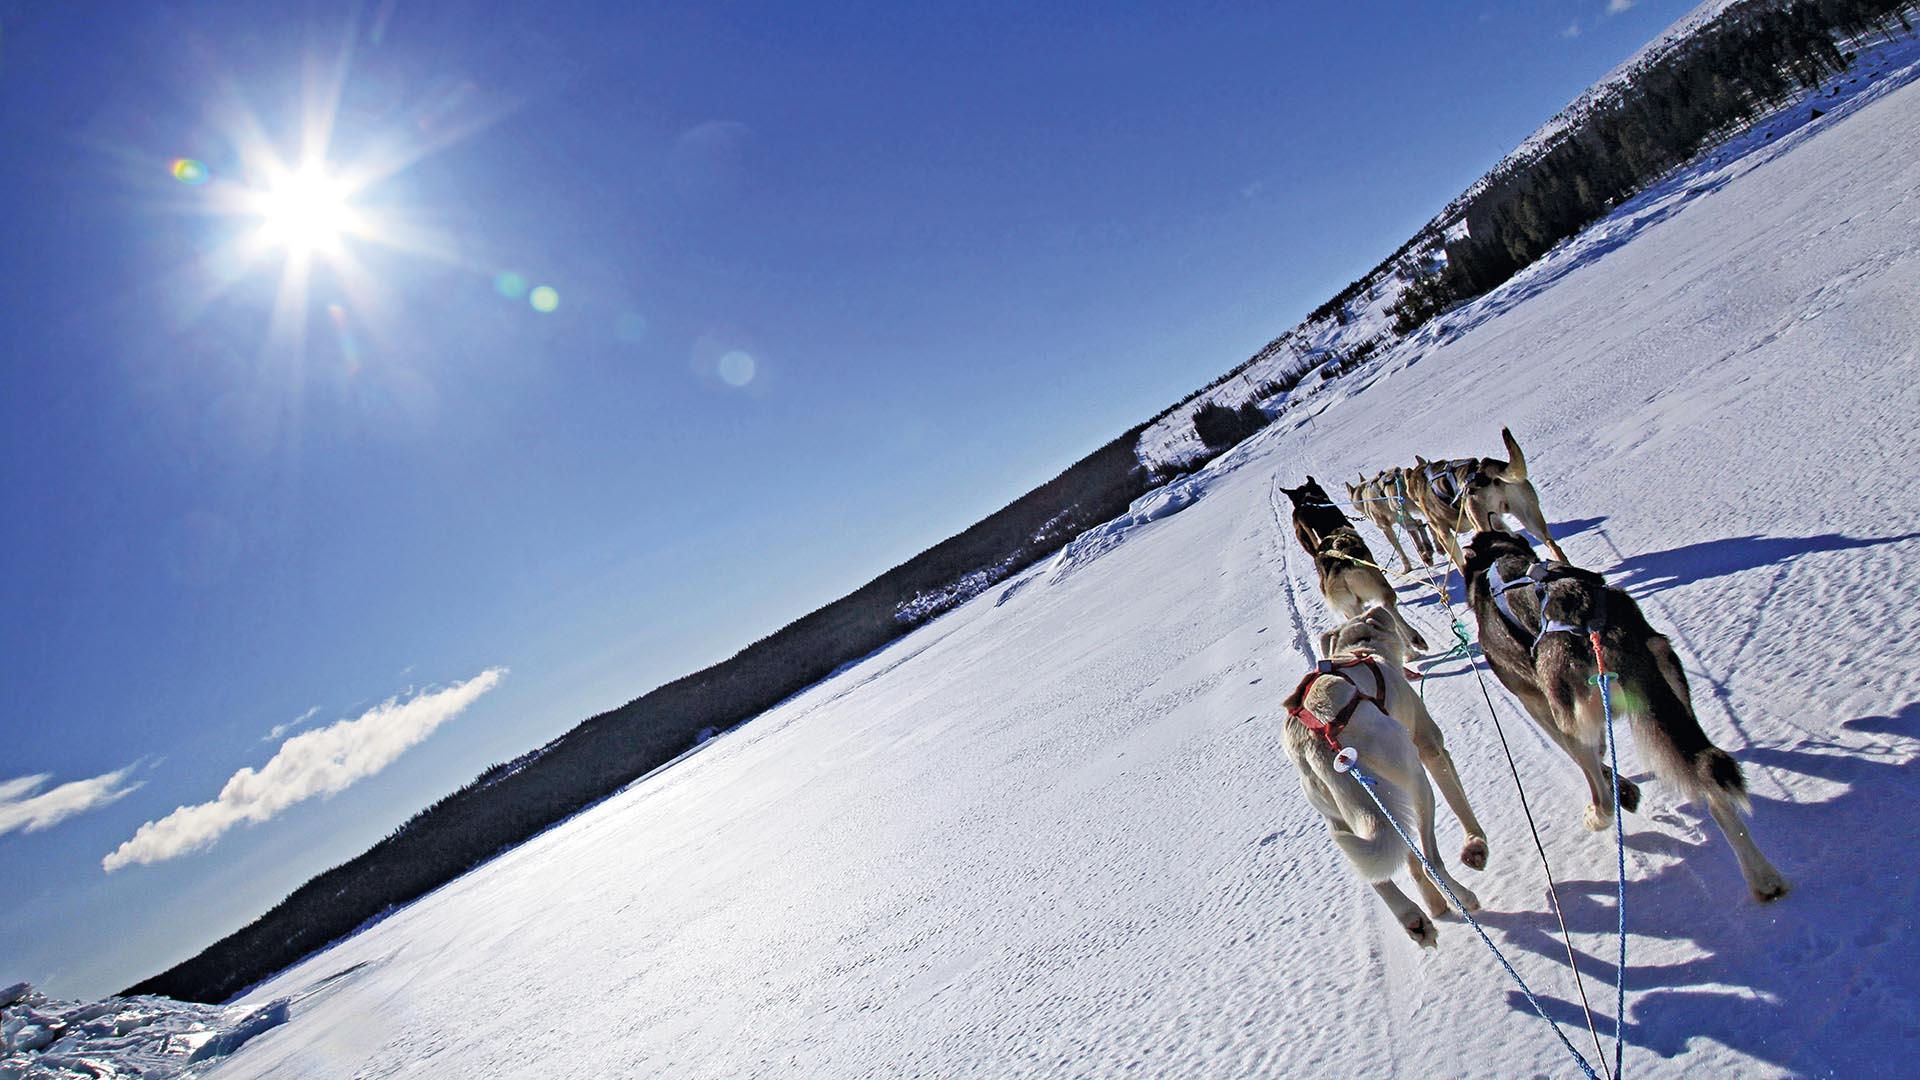 Image with the horizon tilted 45 degrees that shows a dog sledding team racing over a snow-covered lake.